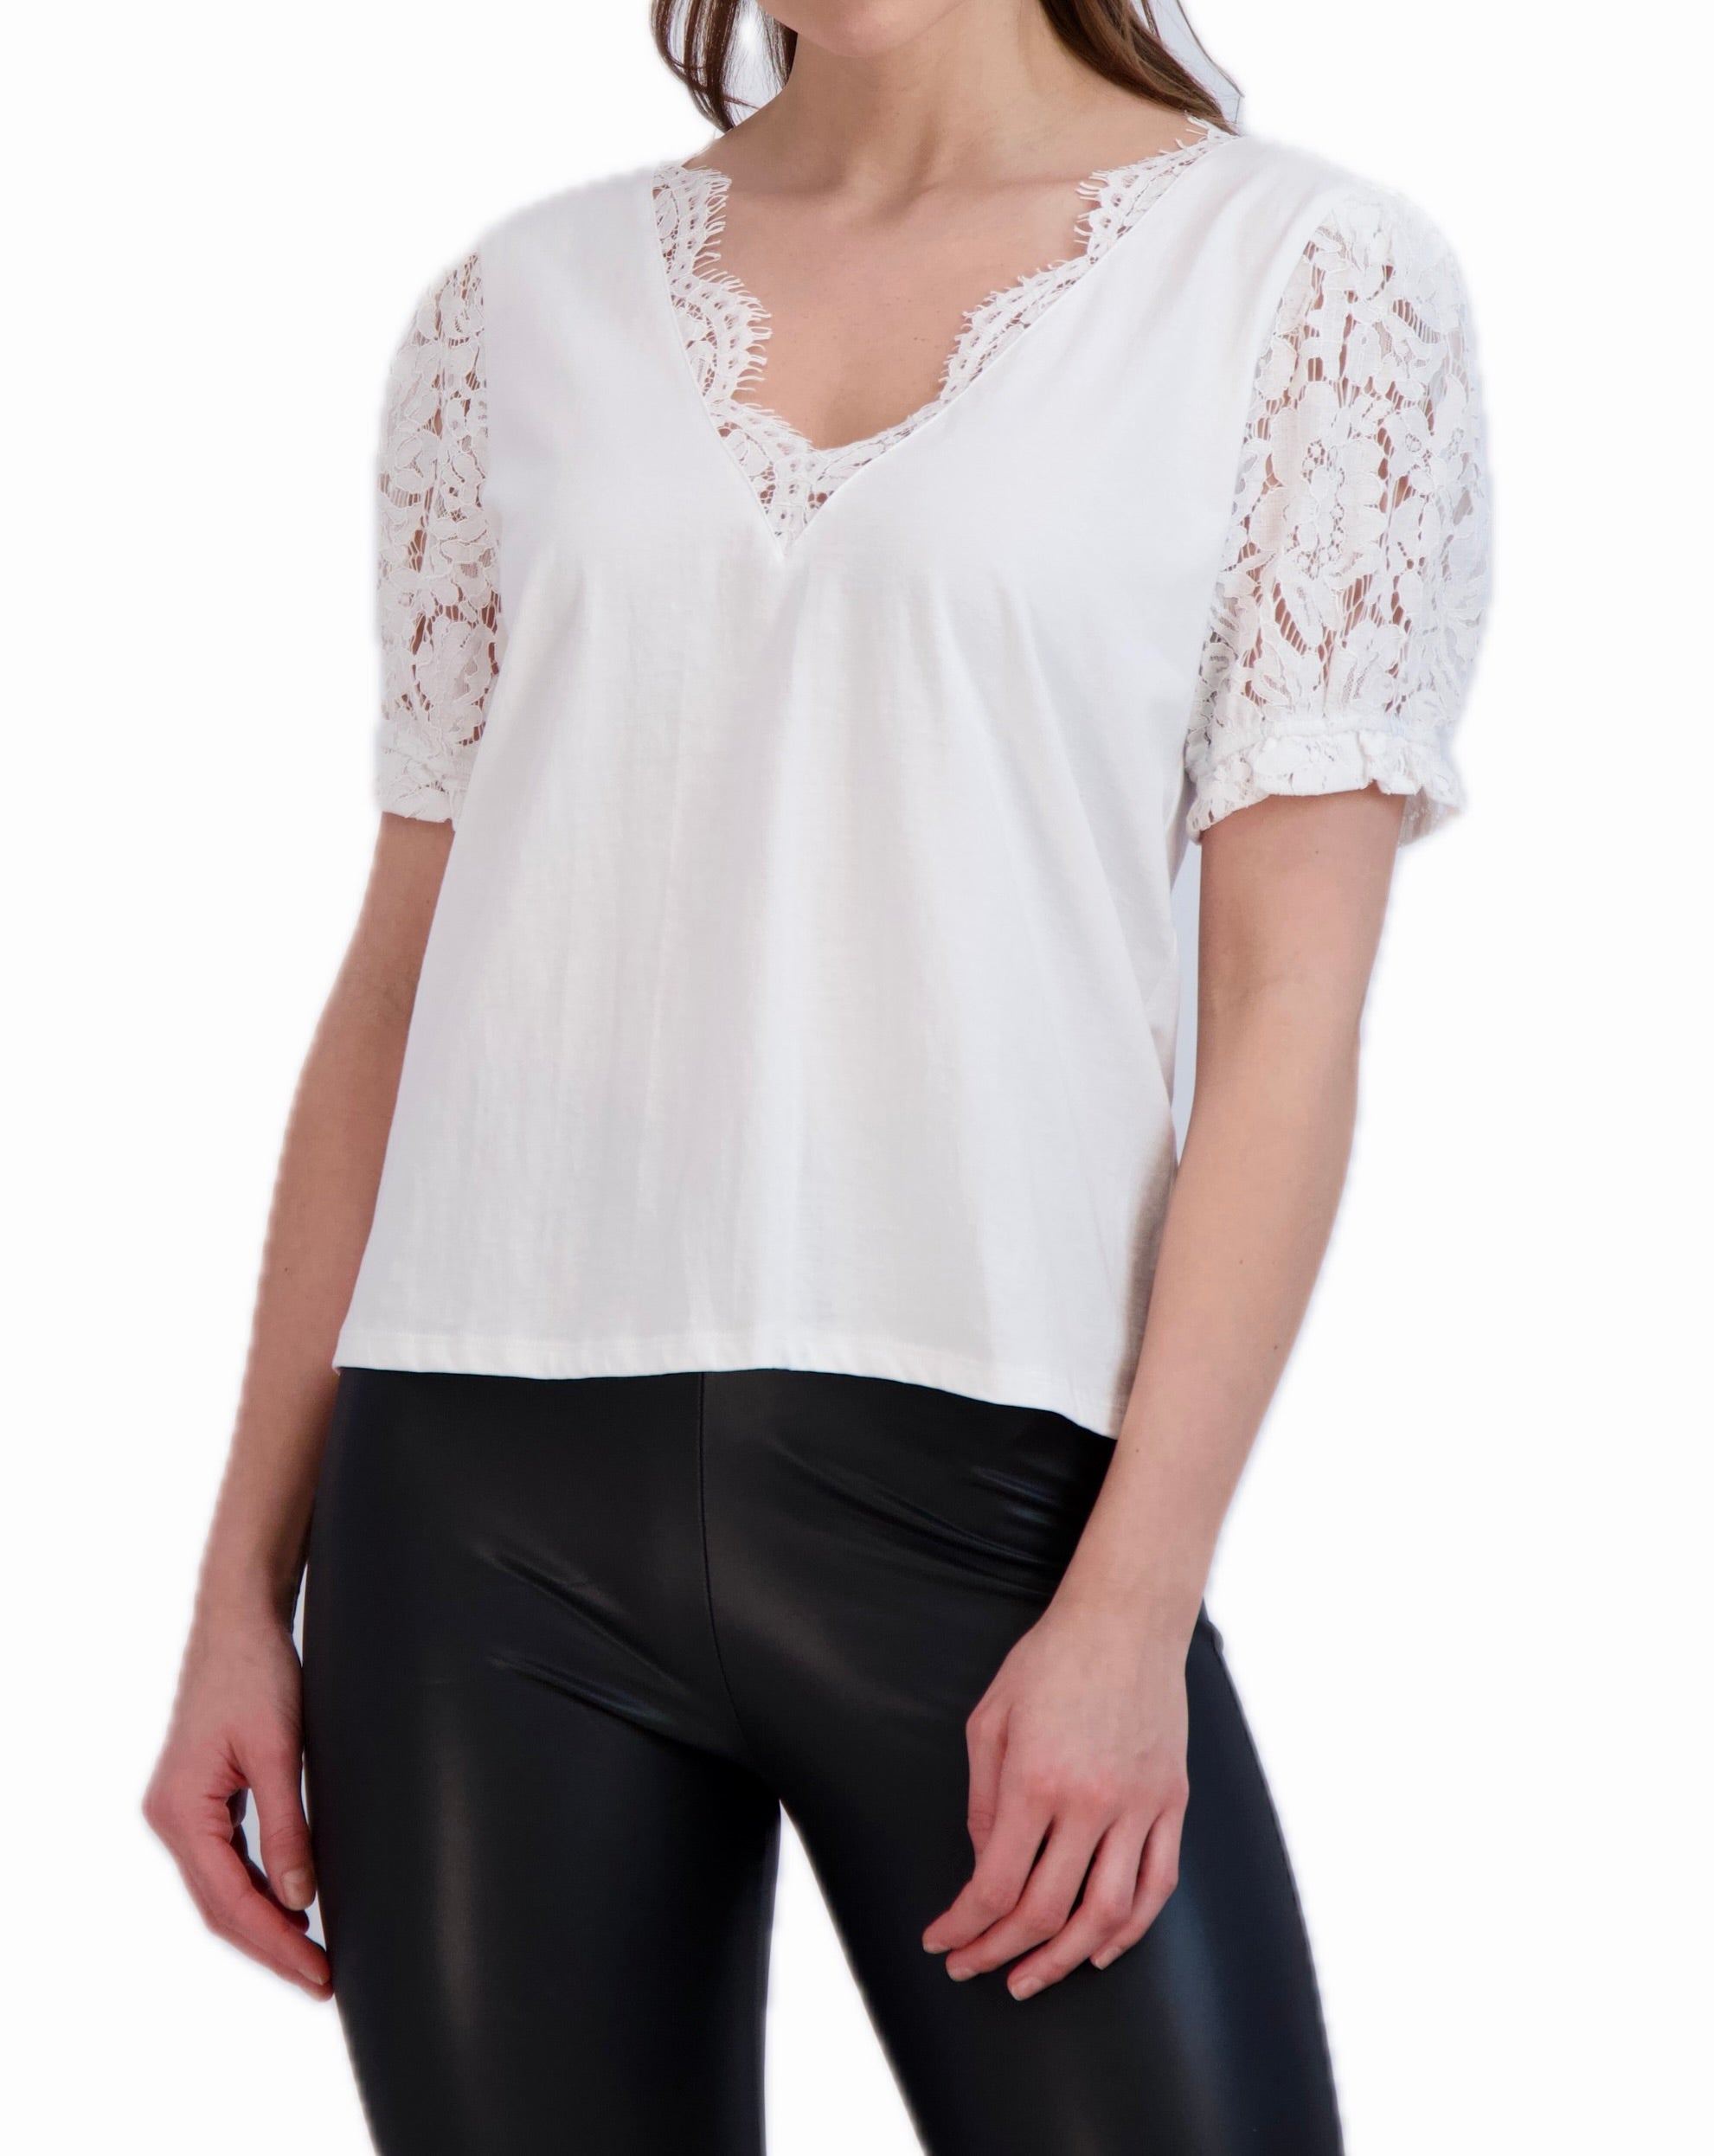 V-Neck Top with Lace Trim Collar and Sleeves